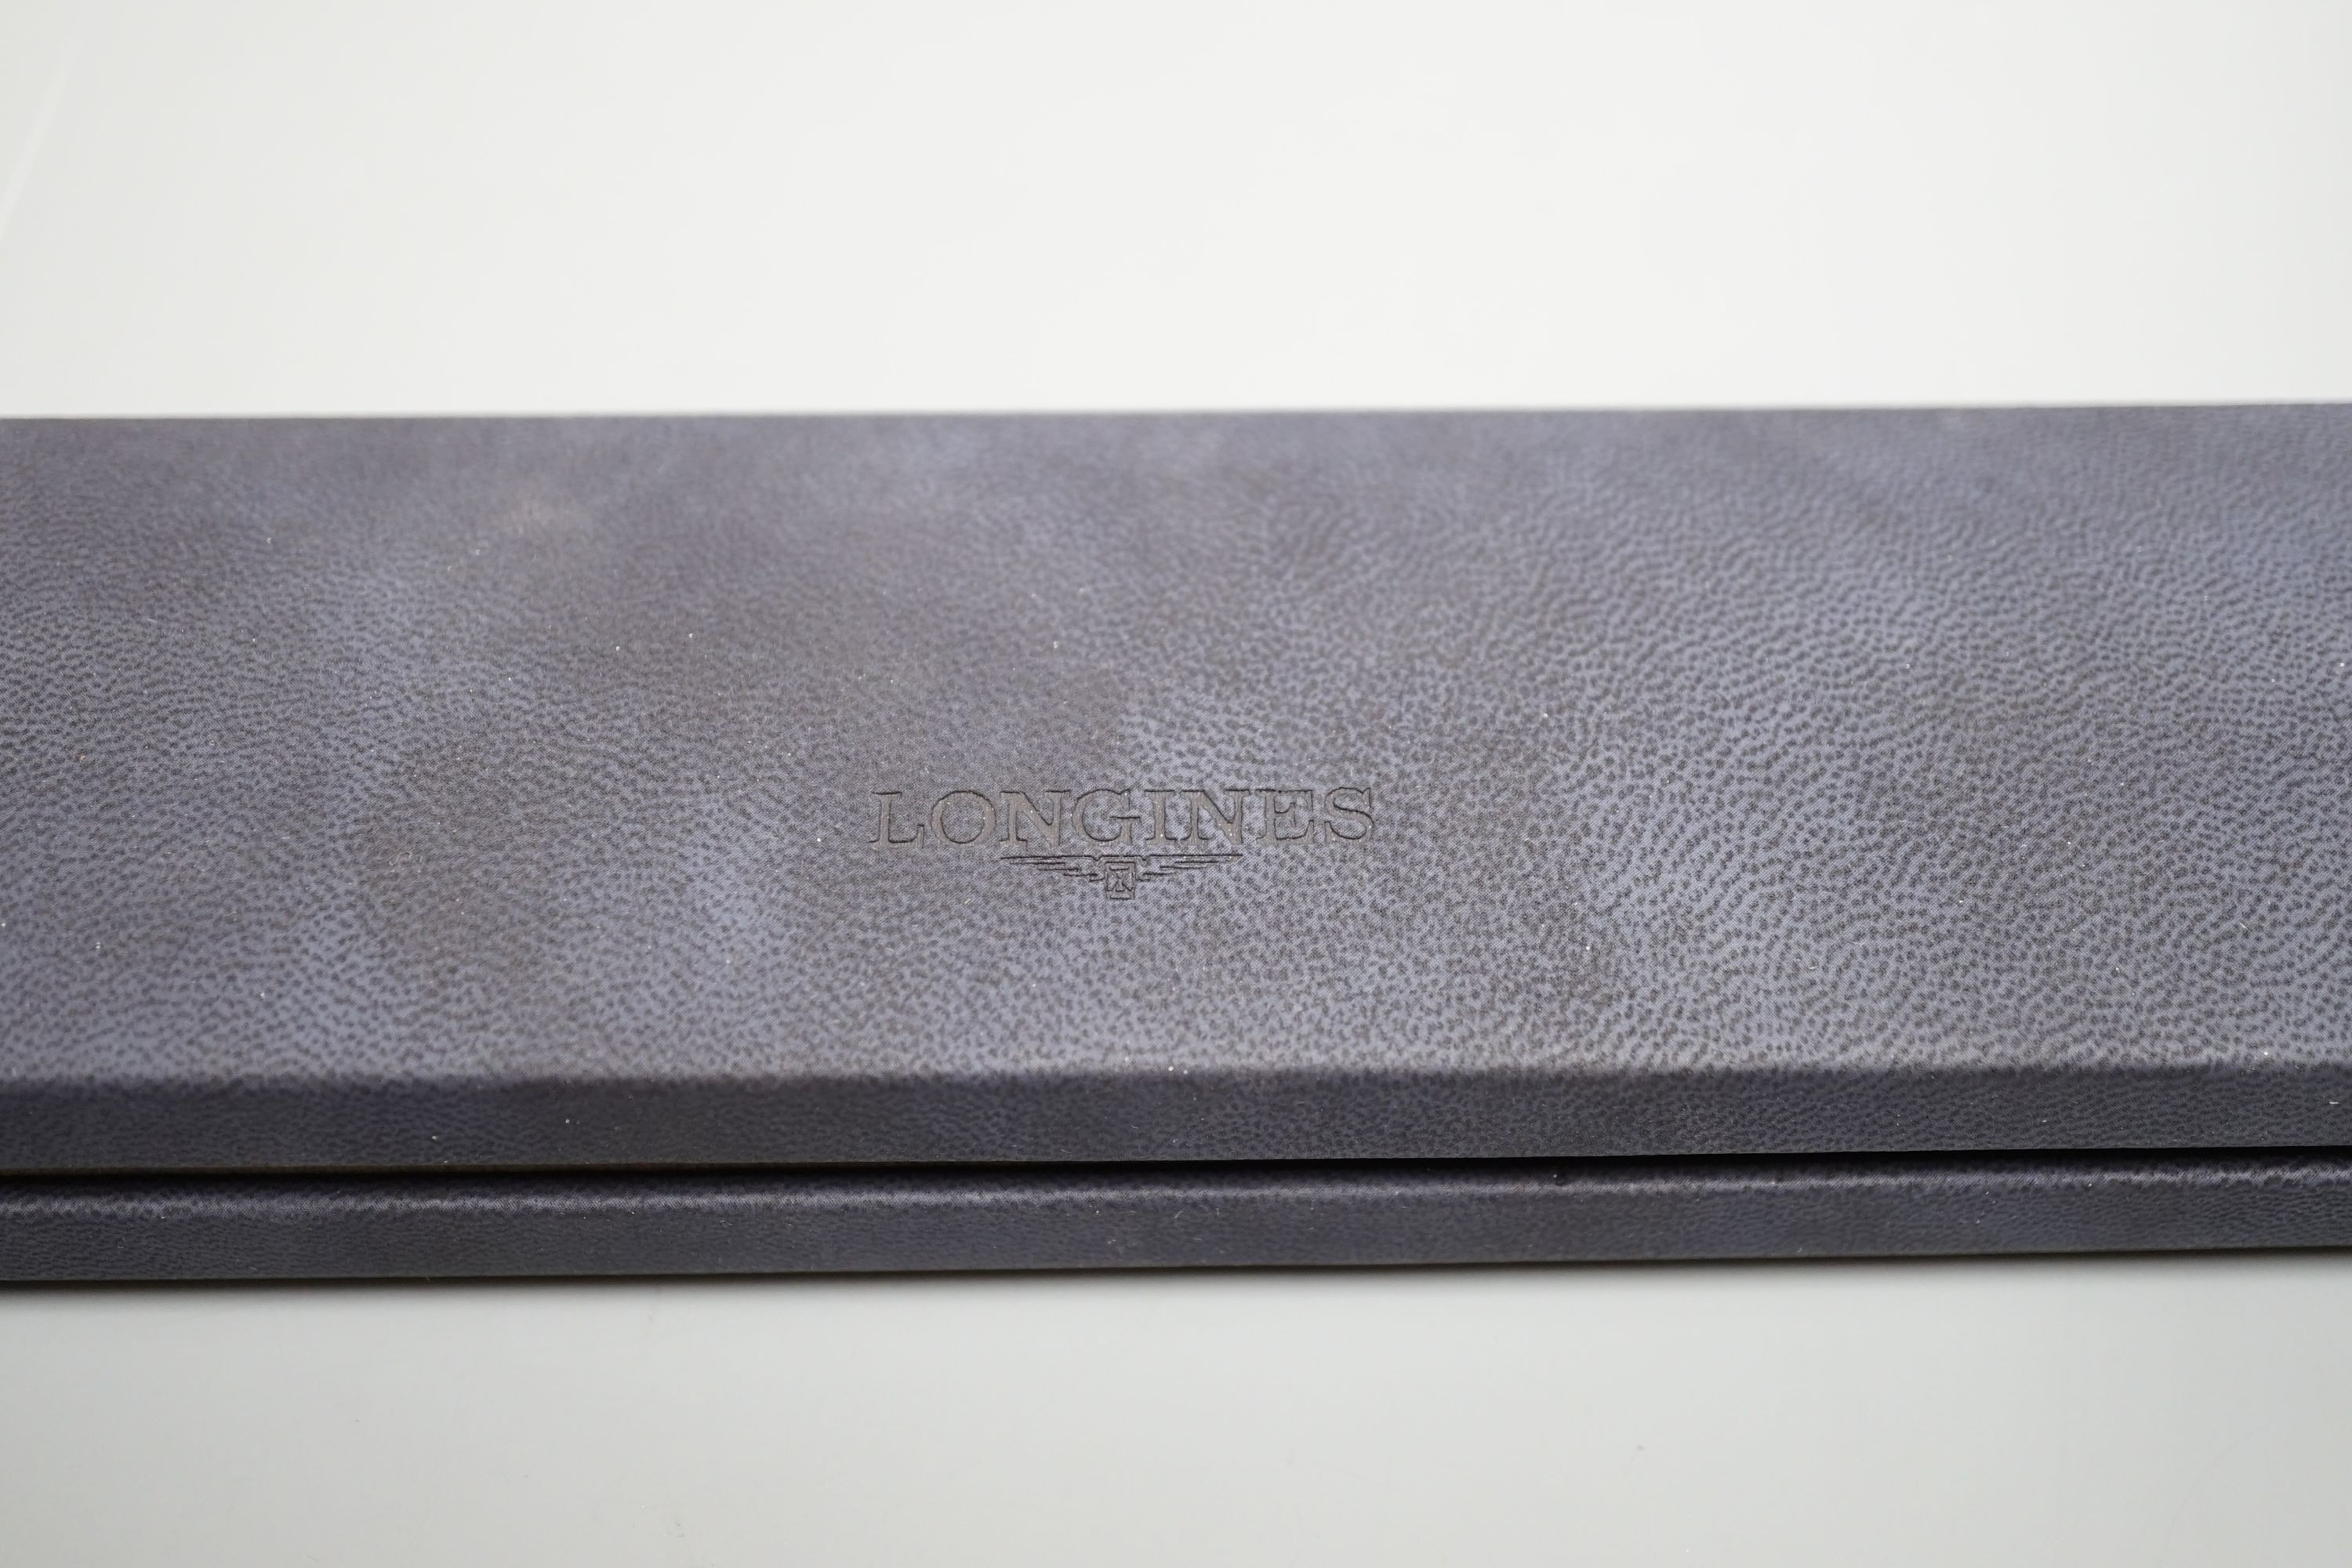 A gentleman's 1999 18ct Longines quartz date wrist watch, with box and papers, case diameter 33mm, gross weight 29.1 grams.